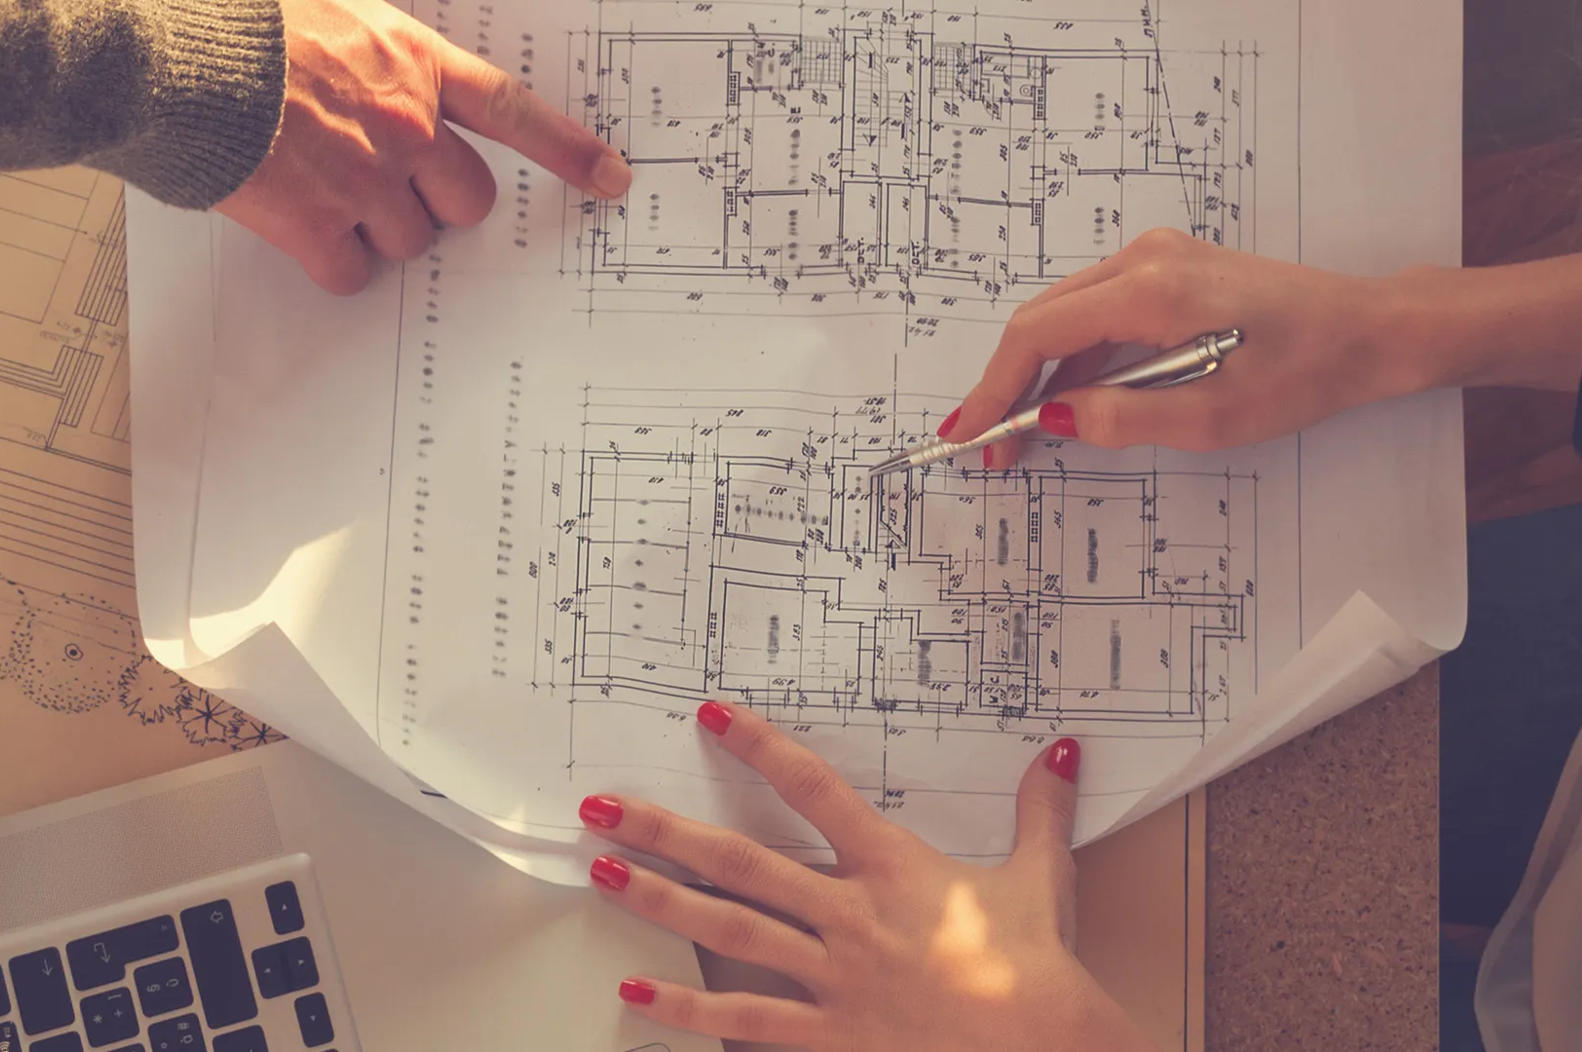 The hands of two people working on a hall plan